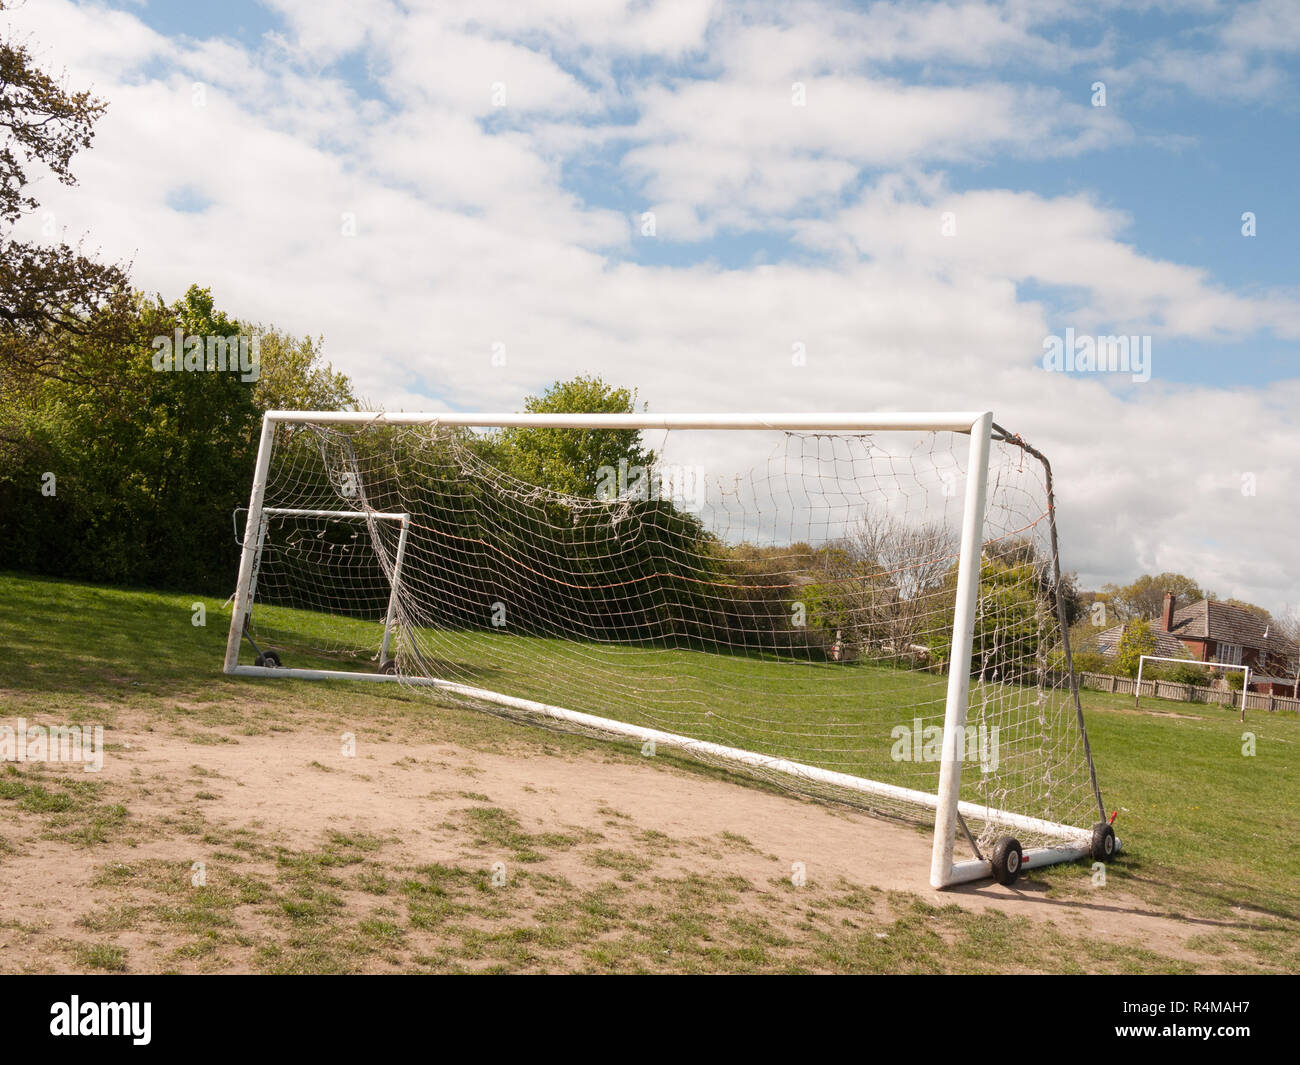 An Empty and Unused Goal Post with A White Net in the Middle of A Park with Grass and Soil on the Ground, Wheels on the Frame to Help Move it and Houses and Trees in the Background, Used For Football and for A Goal Keeper No Person Stock Photo